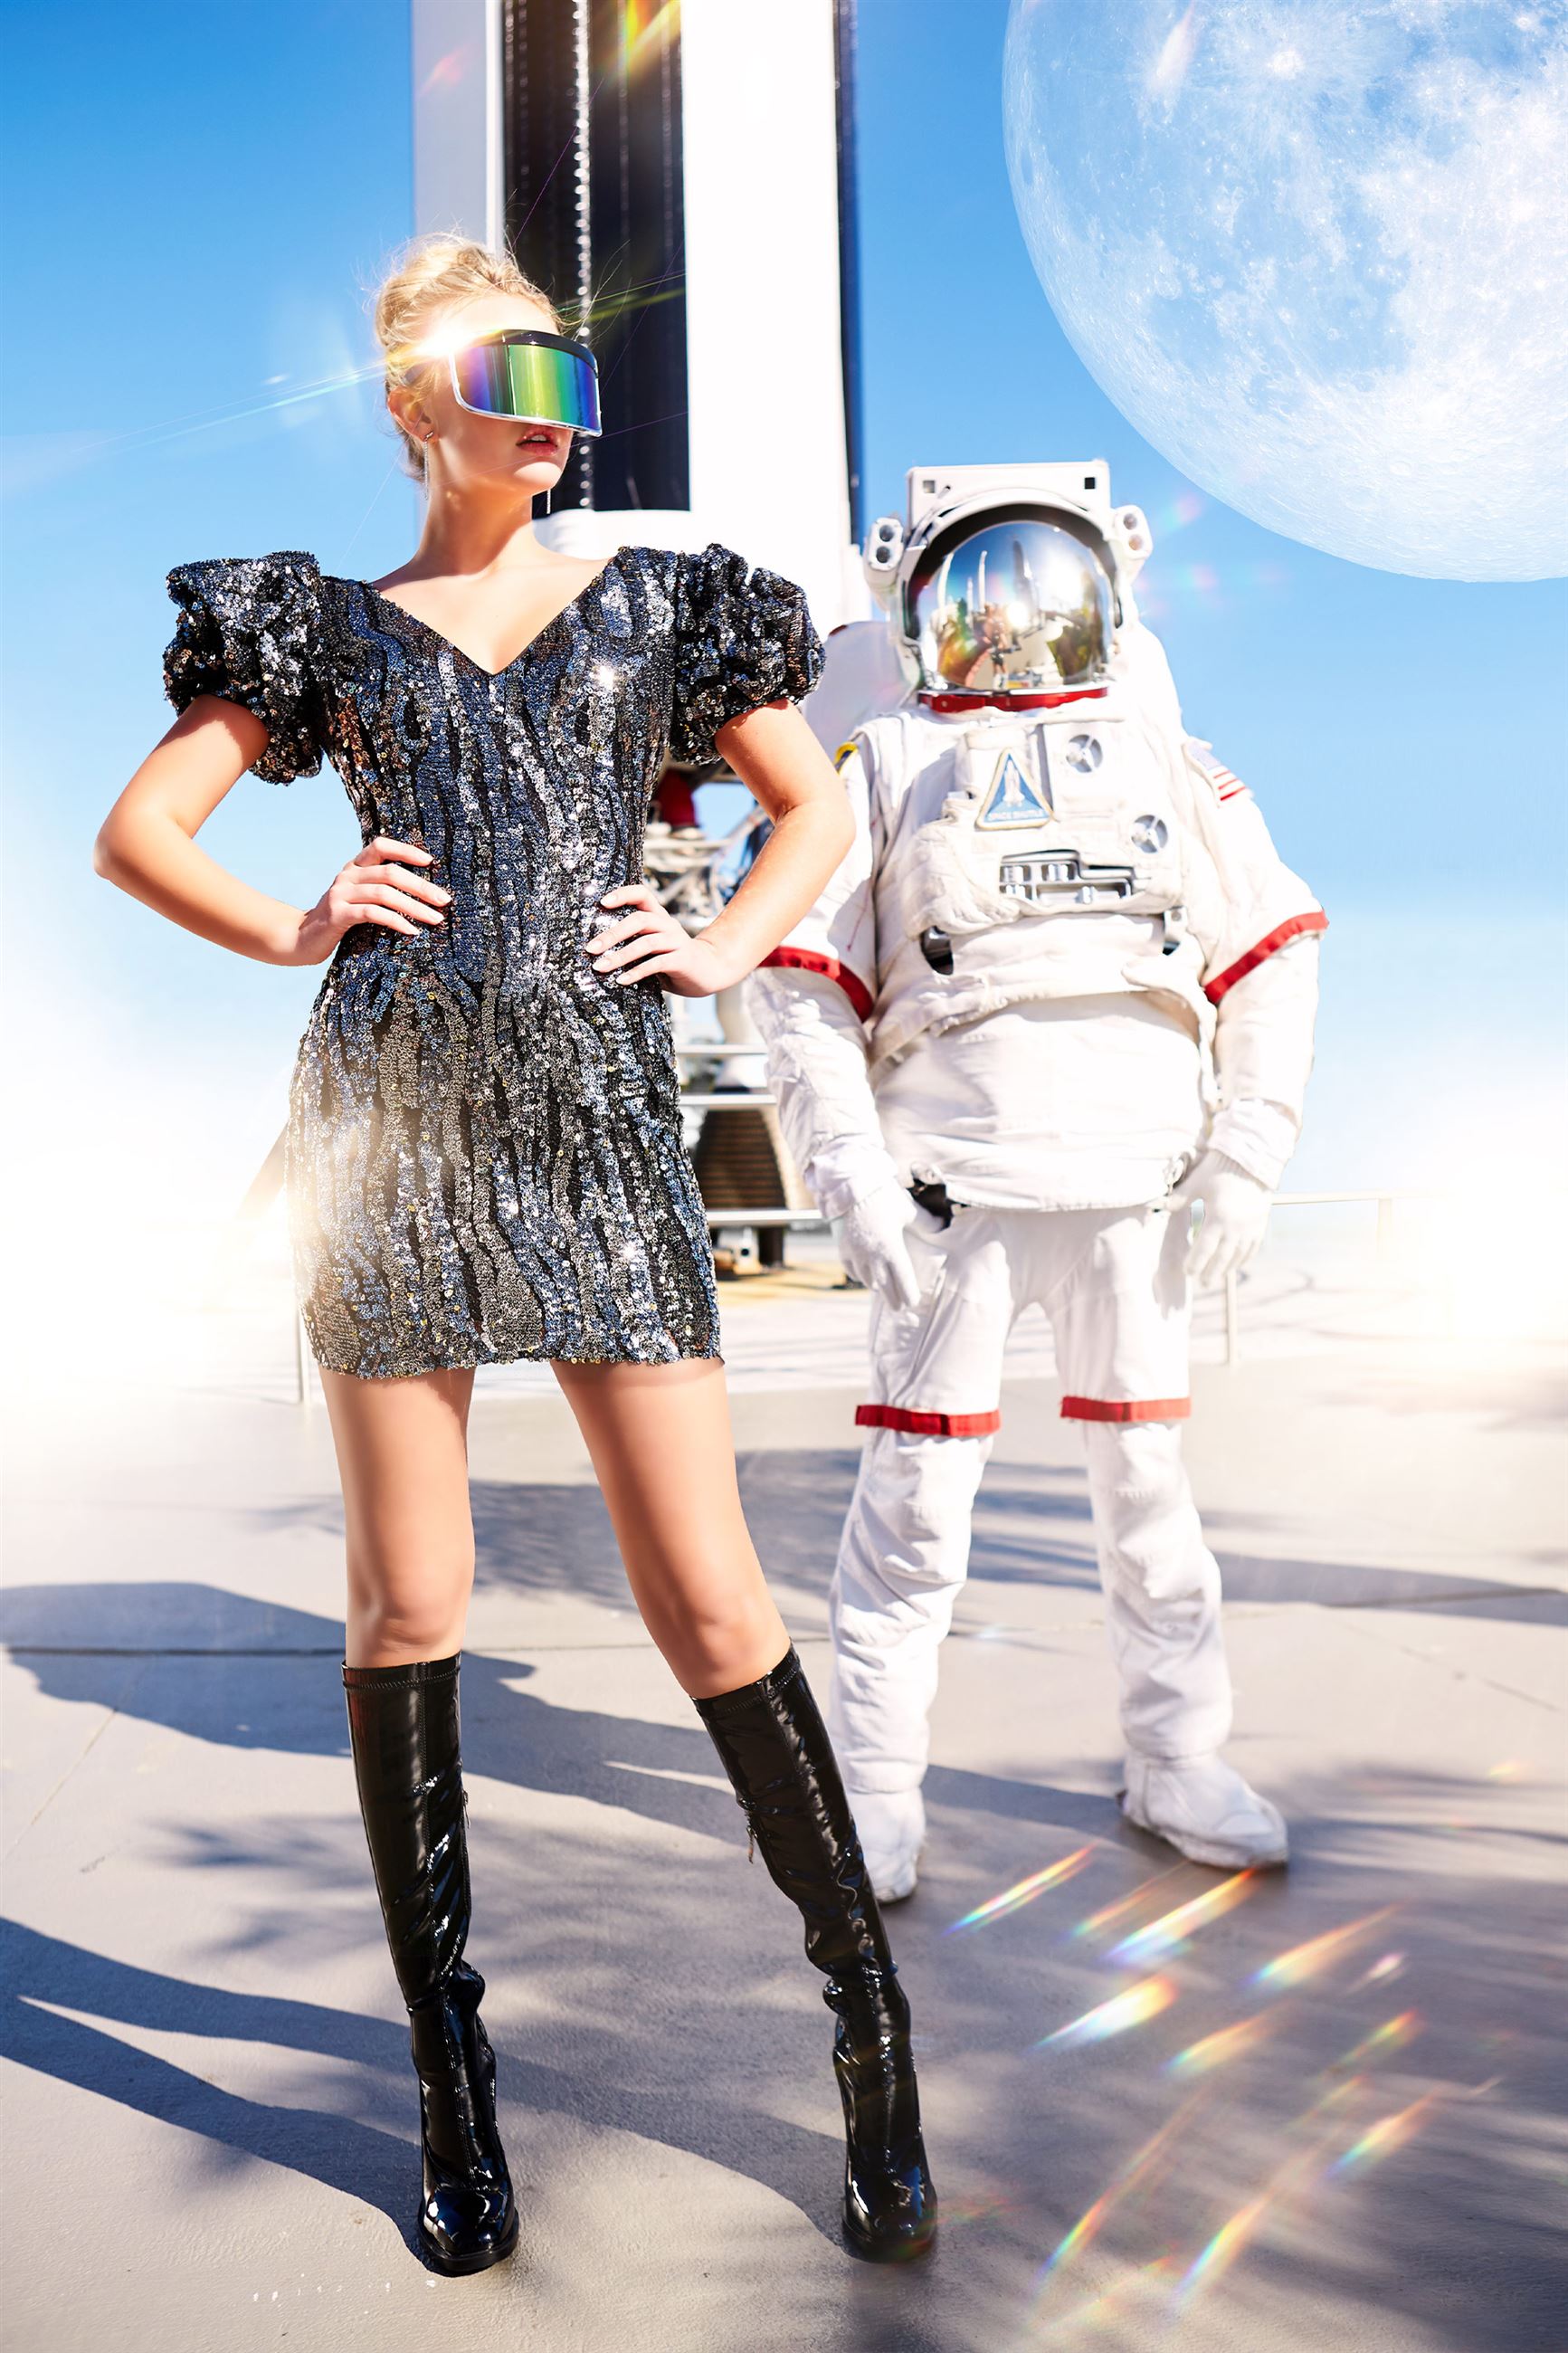 Blonde model in short black and silver dress next to astronaut